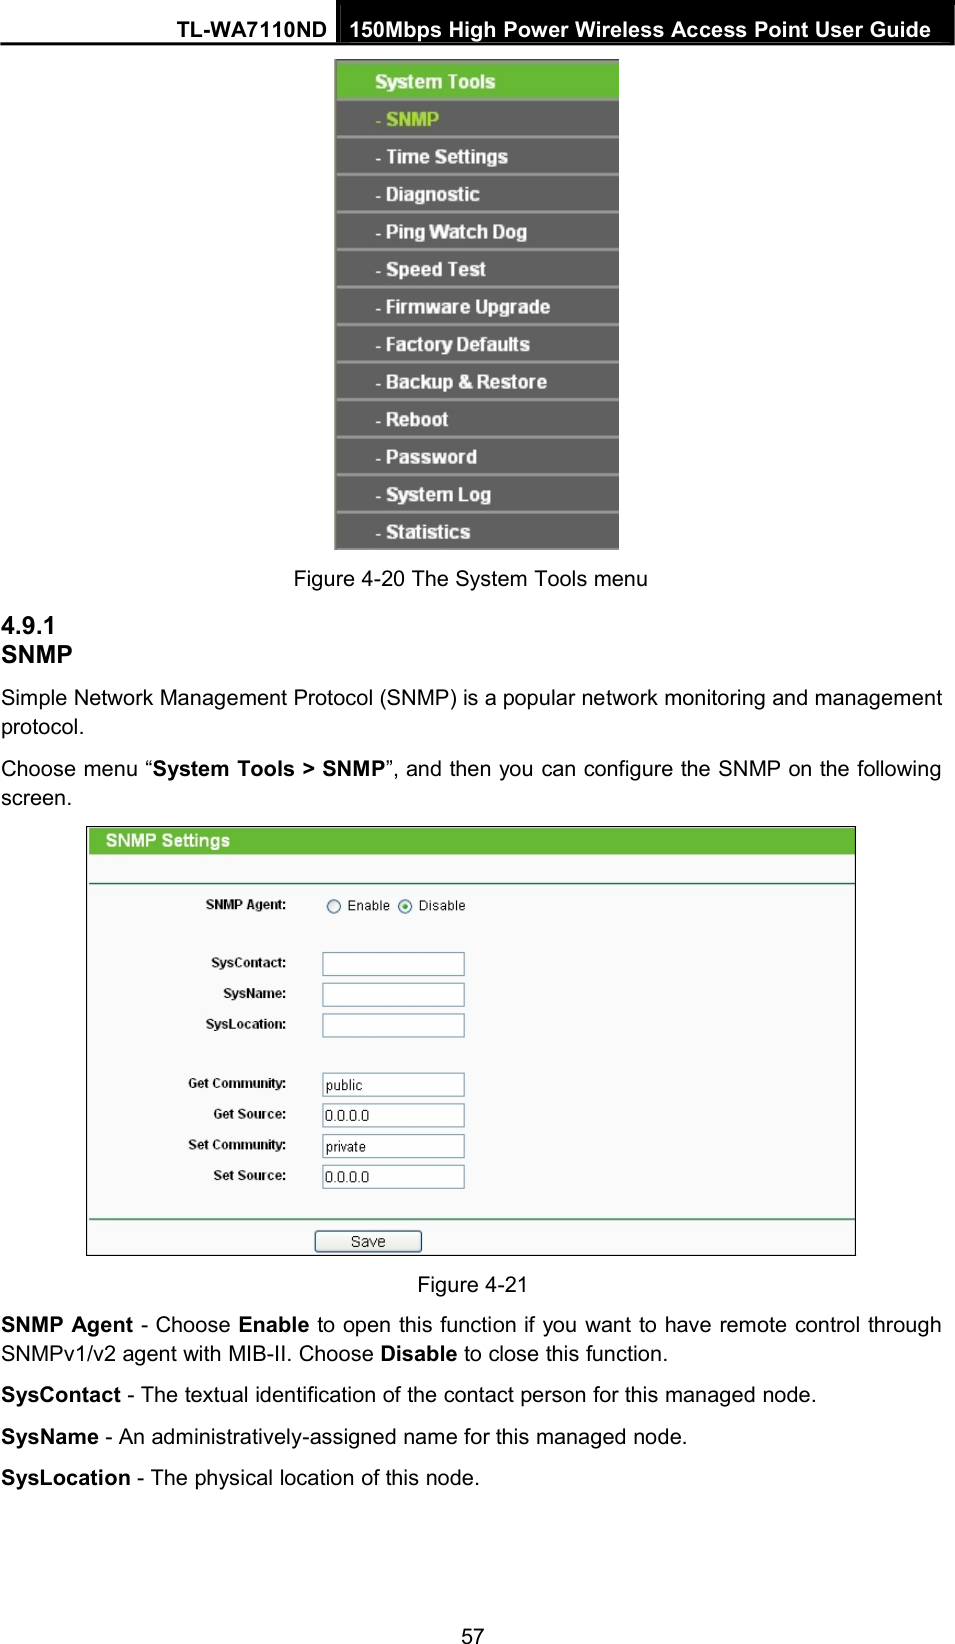 TL-WA7110ND 150Mbps High Power Wireless Access Point User Guide4.9.1SNMPFigure 4-20 The System Tools menuSimple Network Management Protocol (SNMP) is a popular network monitoring and managementprotocol.Choose menu “System Tools &gt; SNMP”, and then you can configure the SNMP on the followingscreen.Figure 4-21SNMP Agent - Choose Enable to open this function if you want to have remote control throughSNMPv1/v2 agent with MIB-II. Choose Disable to close this function.SysContact - The textual identification of the contact person for this managed node.SysName - An administratively-assigned name for this managed node.SysLocation - The physical location of this node.57